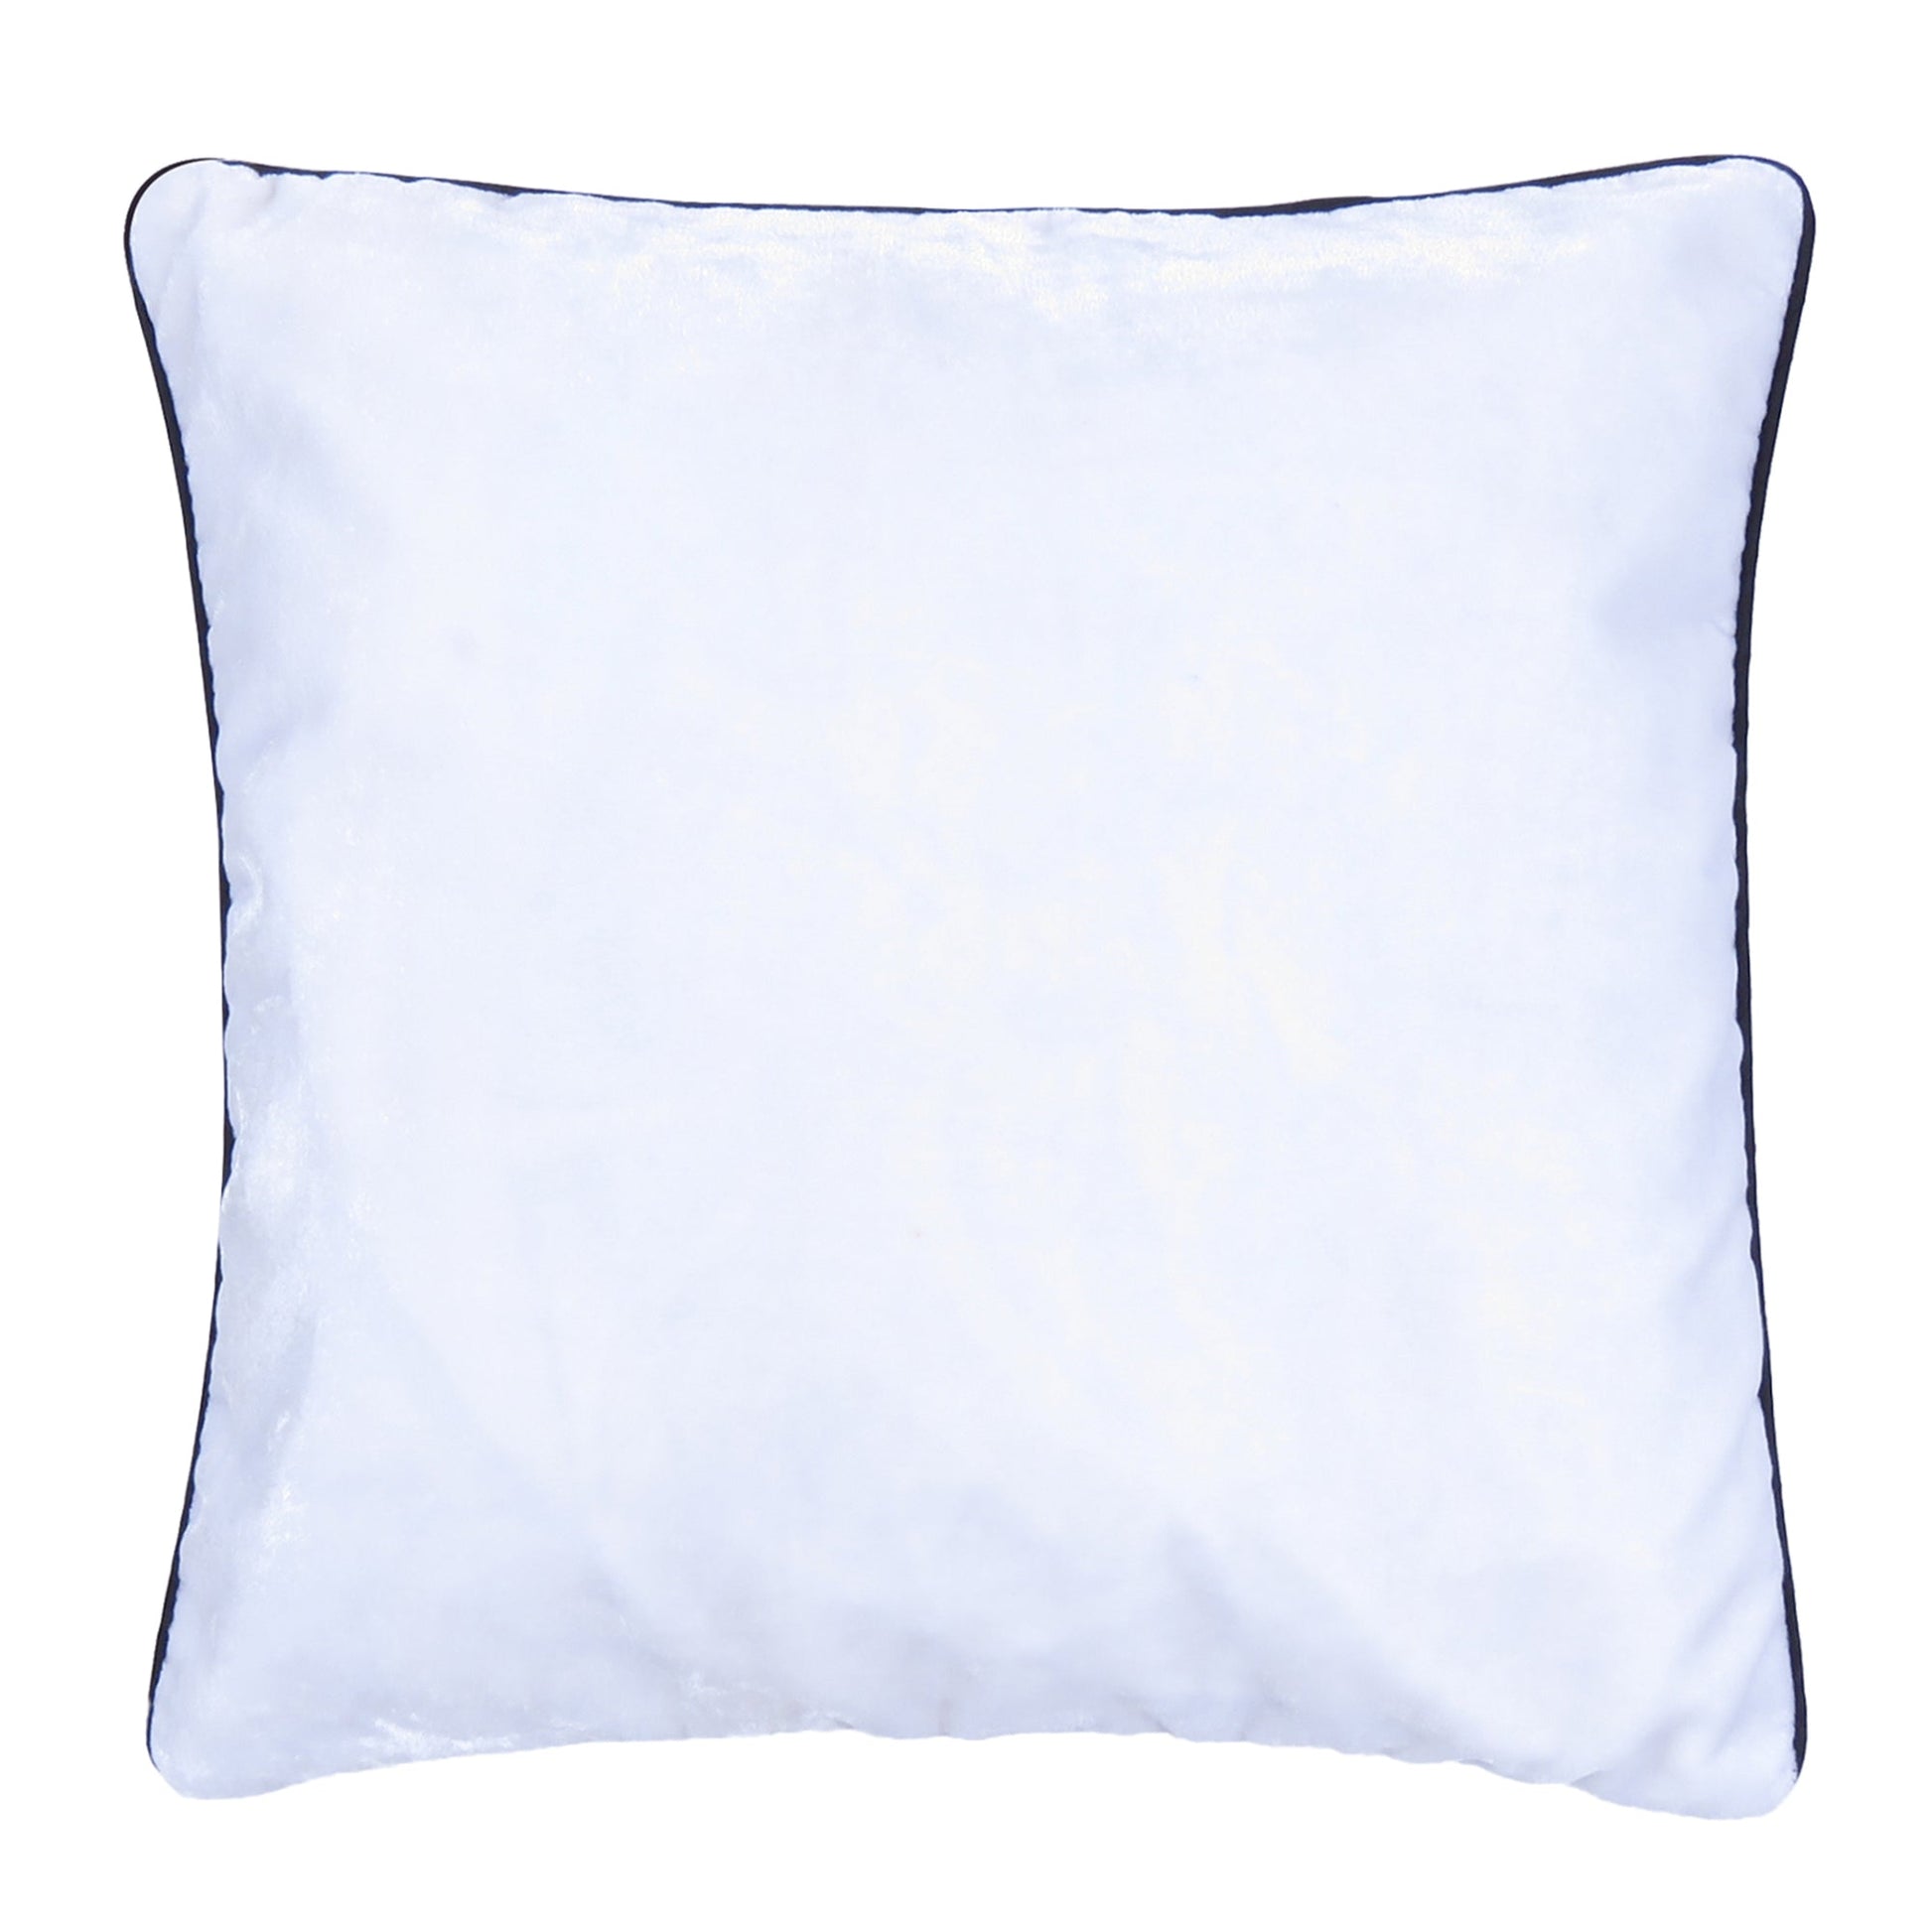 White Velvet Cushion Cover with Black Piping Edge in Set of 2